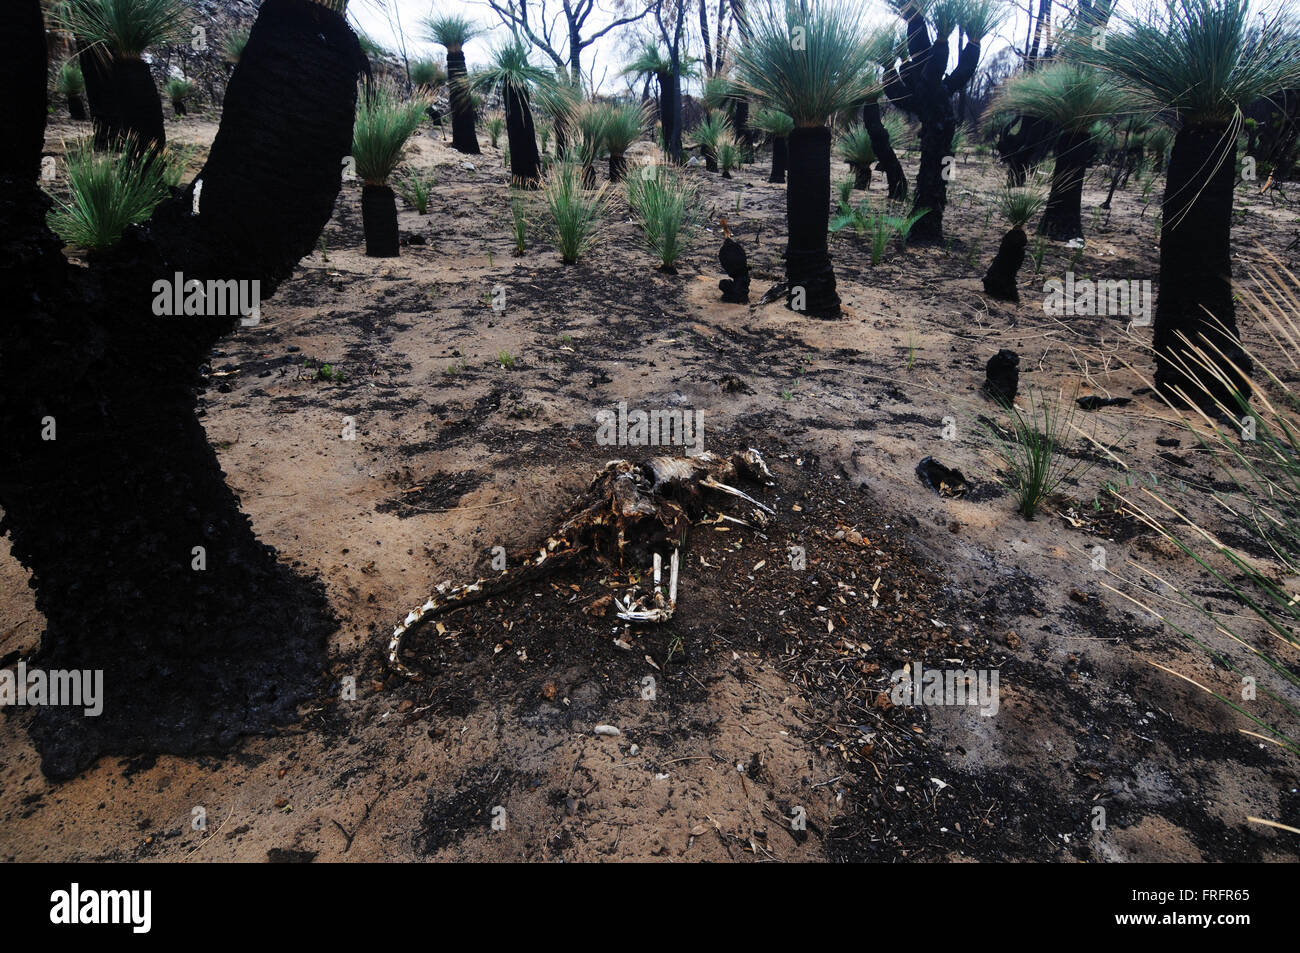 Preston Beach, southwest Western Australia - 22 March 2016 - Remains of a kangaroo amongst burnt but regrowing Grass trees (Xanthorrhoea), which are amongst the first species to show signs of recovery. Early signs of regrowth after the devastating January 2016 bushfires are starting to be seen in some of the Australian native forest ecosystems in the region following recent rains. Credit:  Suzanne Long/Alamy Live News Stock Photo